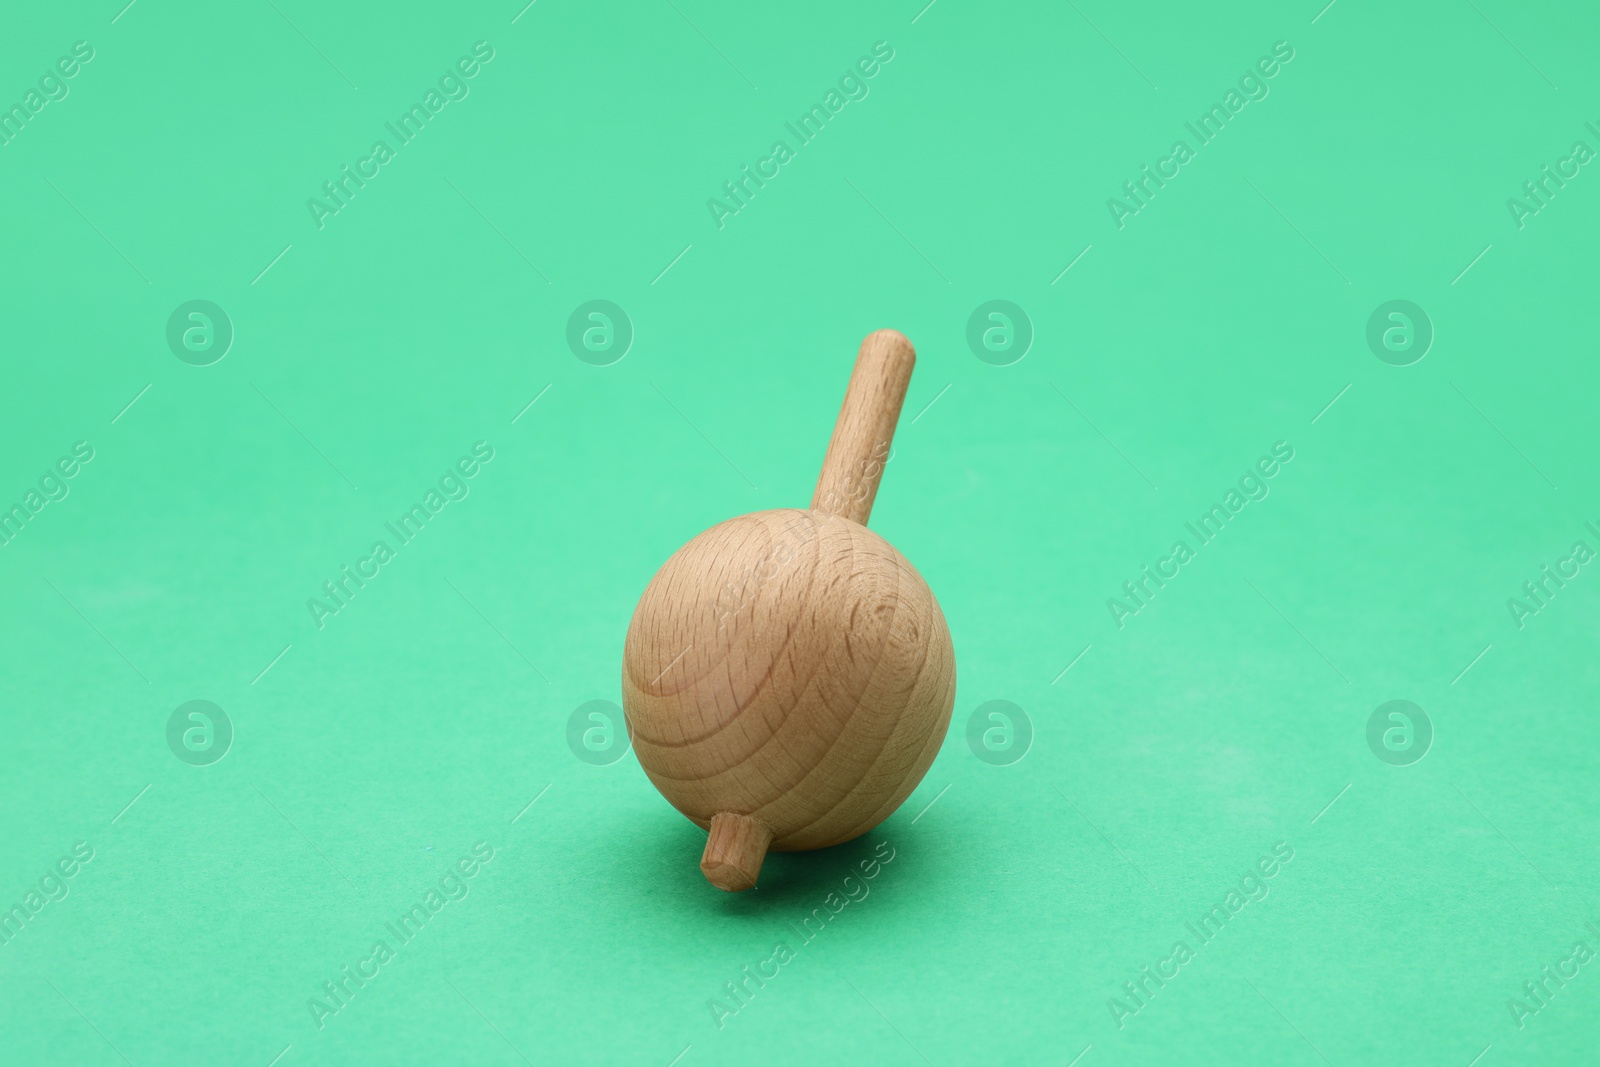 Photo of One wooden spinning top on green background. Toy whirligig